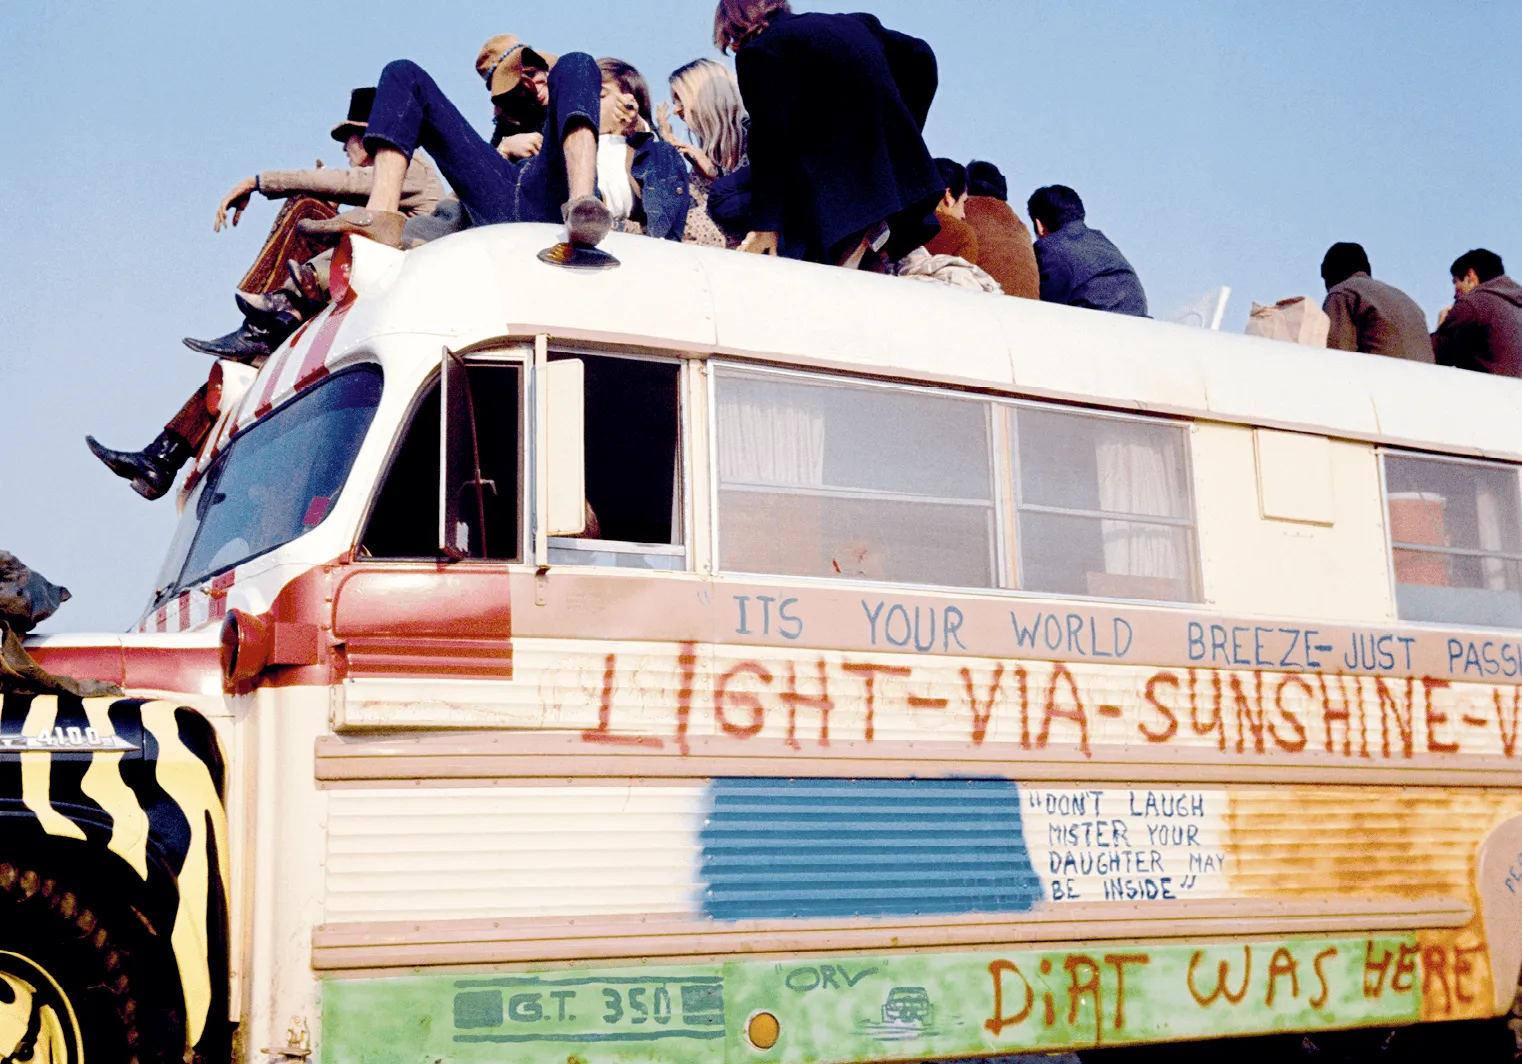 A group of hippies sit on top of a graffi ti-painted bus during Altamont free rock concert, 1969.